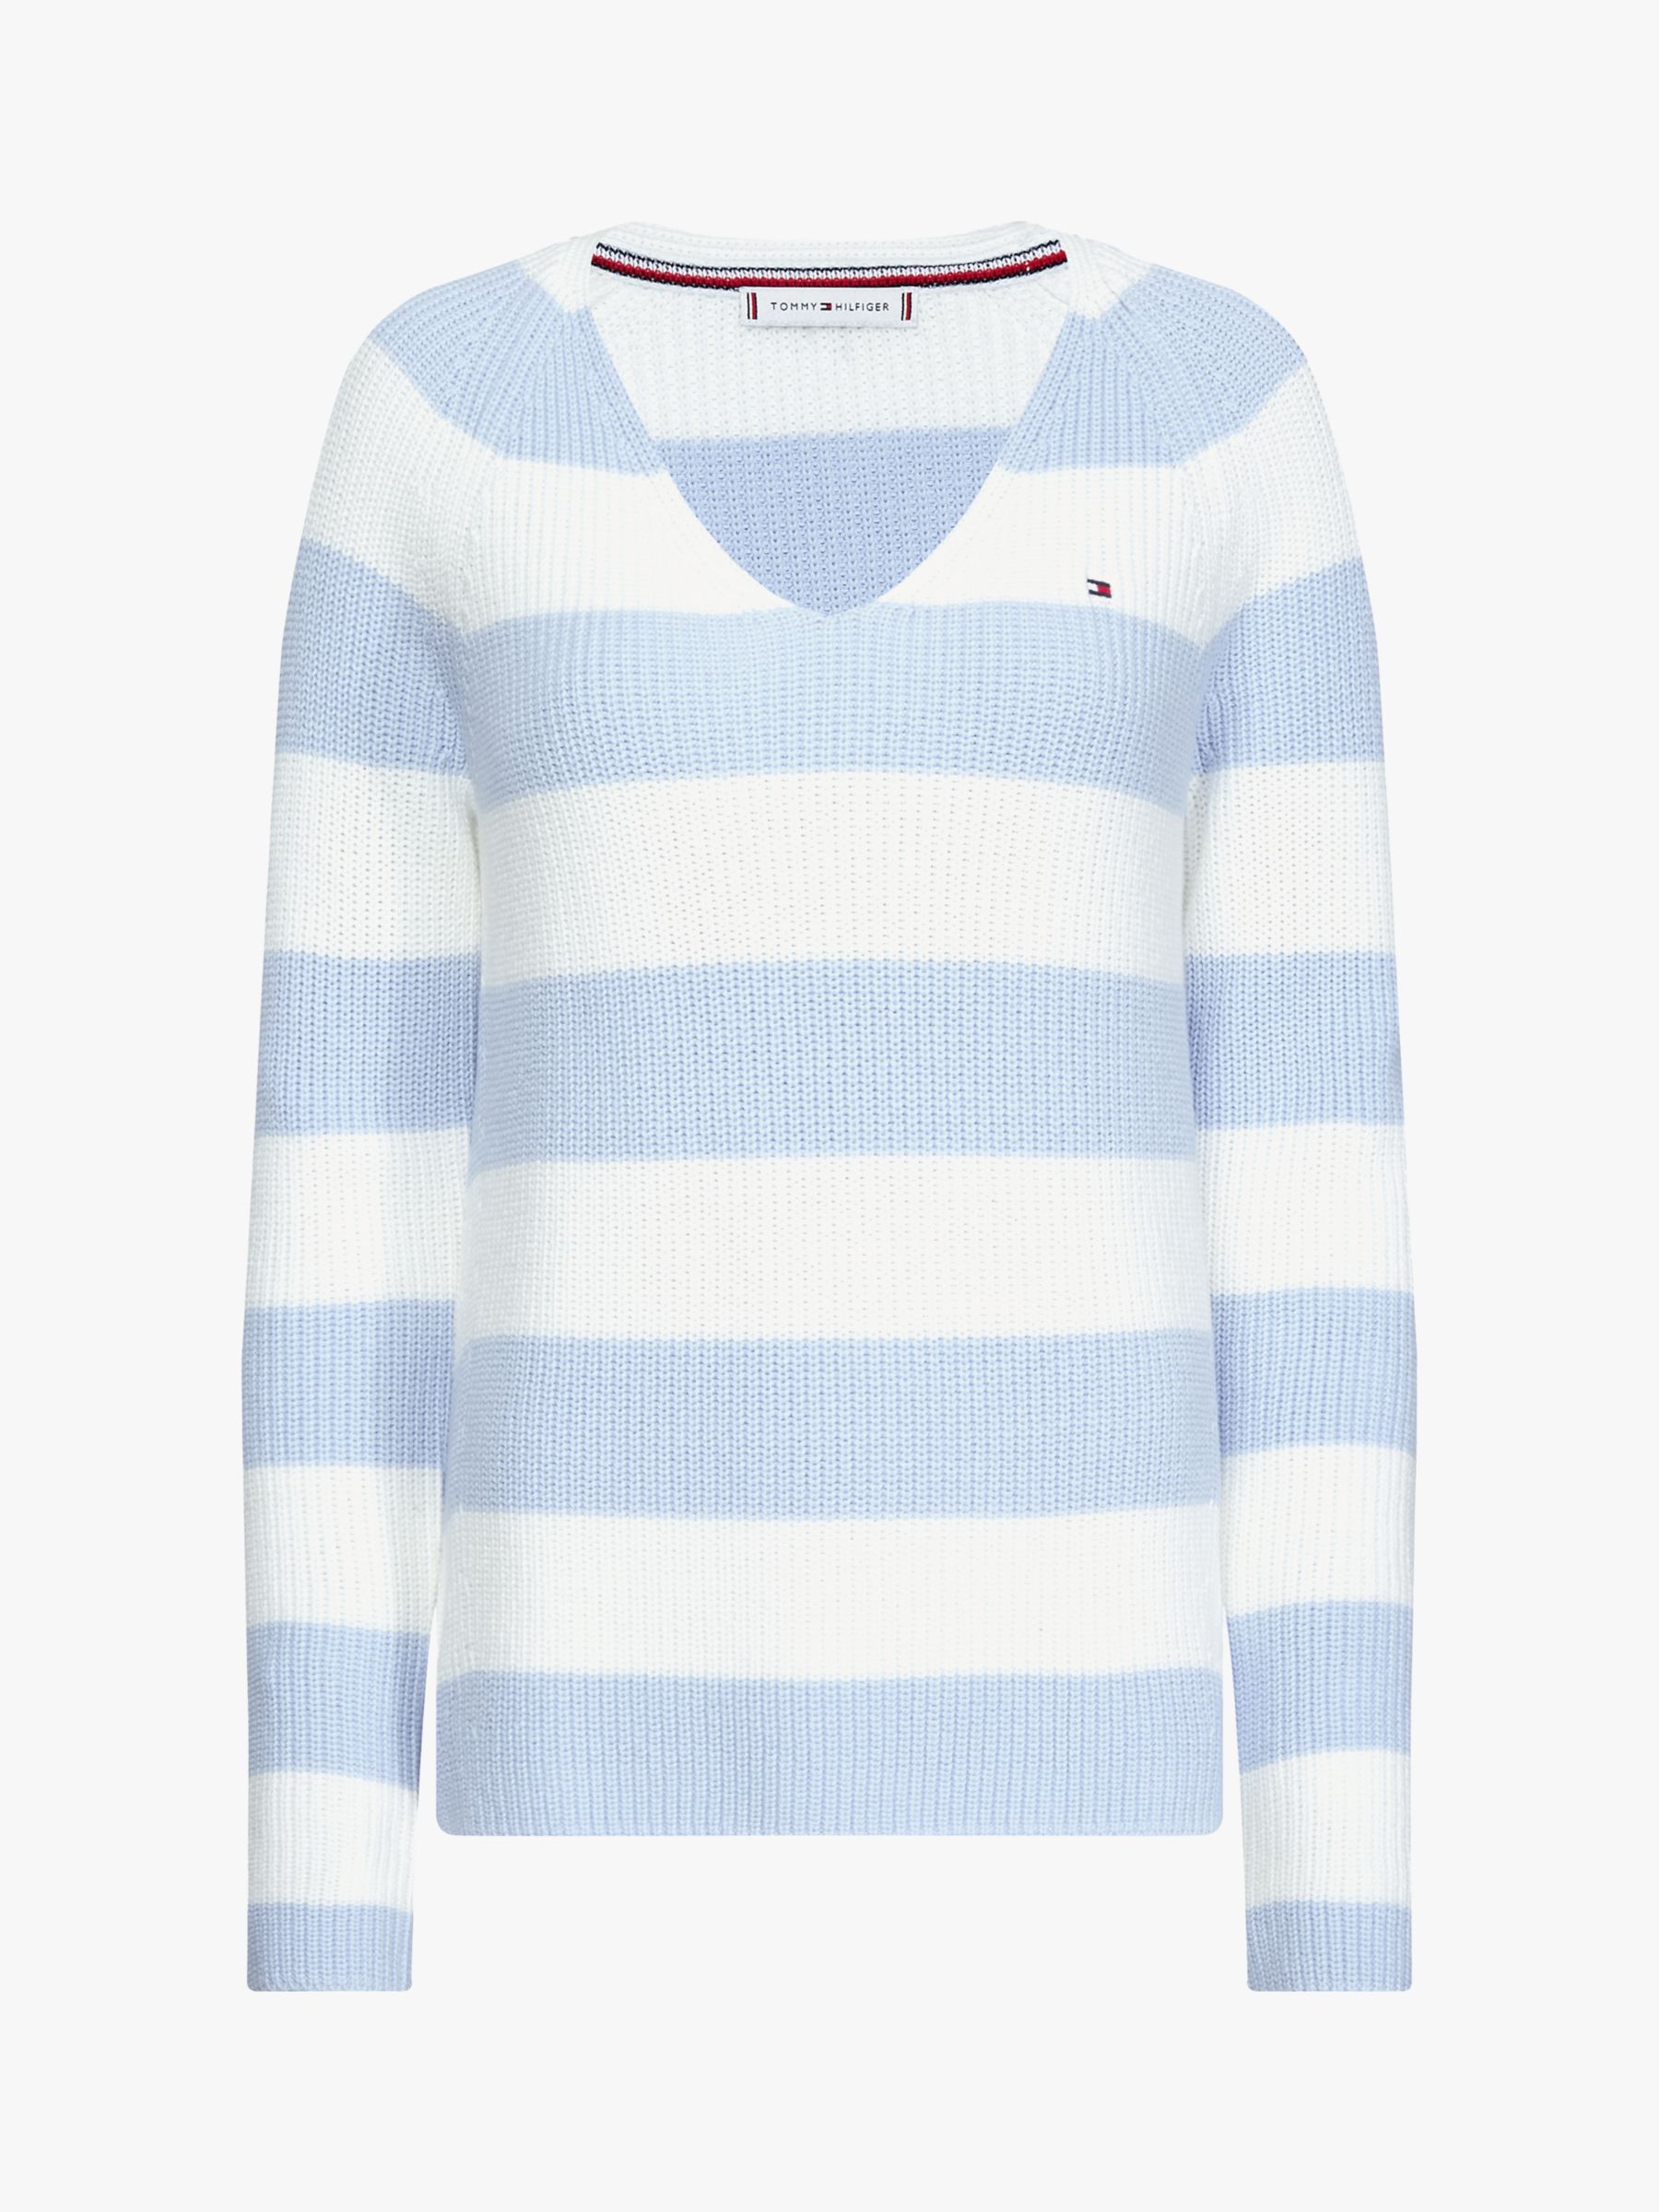 tommy hilfiger blue and white striped sweater